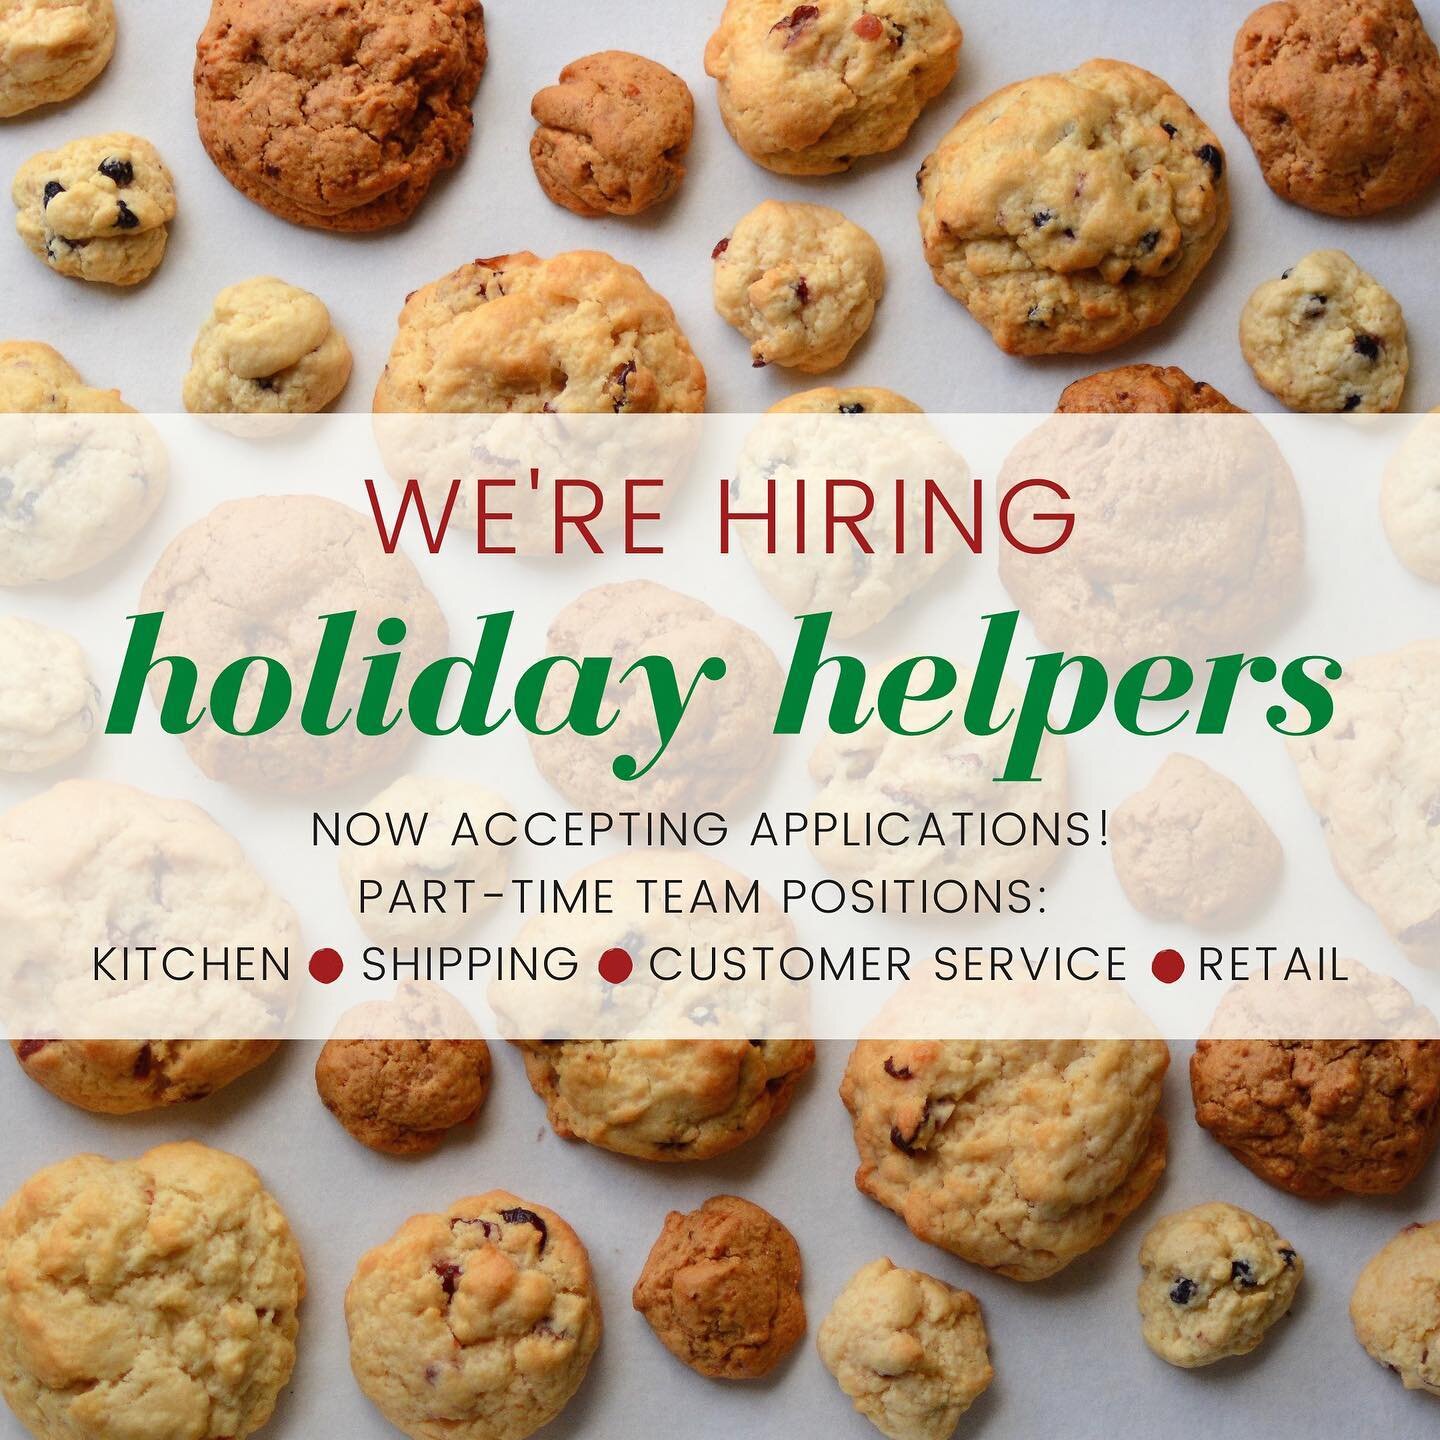 The coming holidays mean our team is growing! If you are interested in joining our holiday crew, follow the link in our profile to apply. Know someone who might be interested? Tag them in the comments! We can&rsquo;t wait to hear from you!